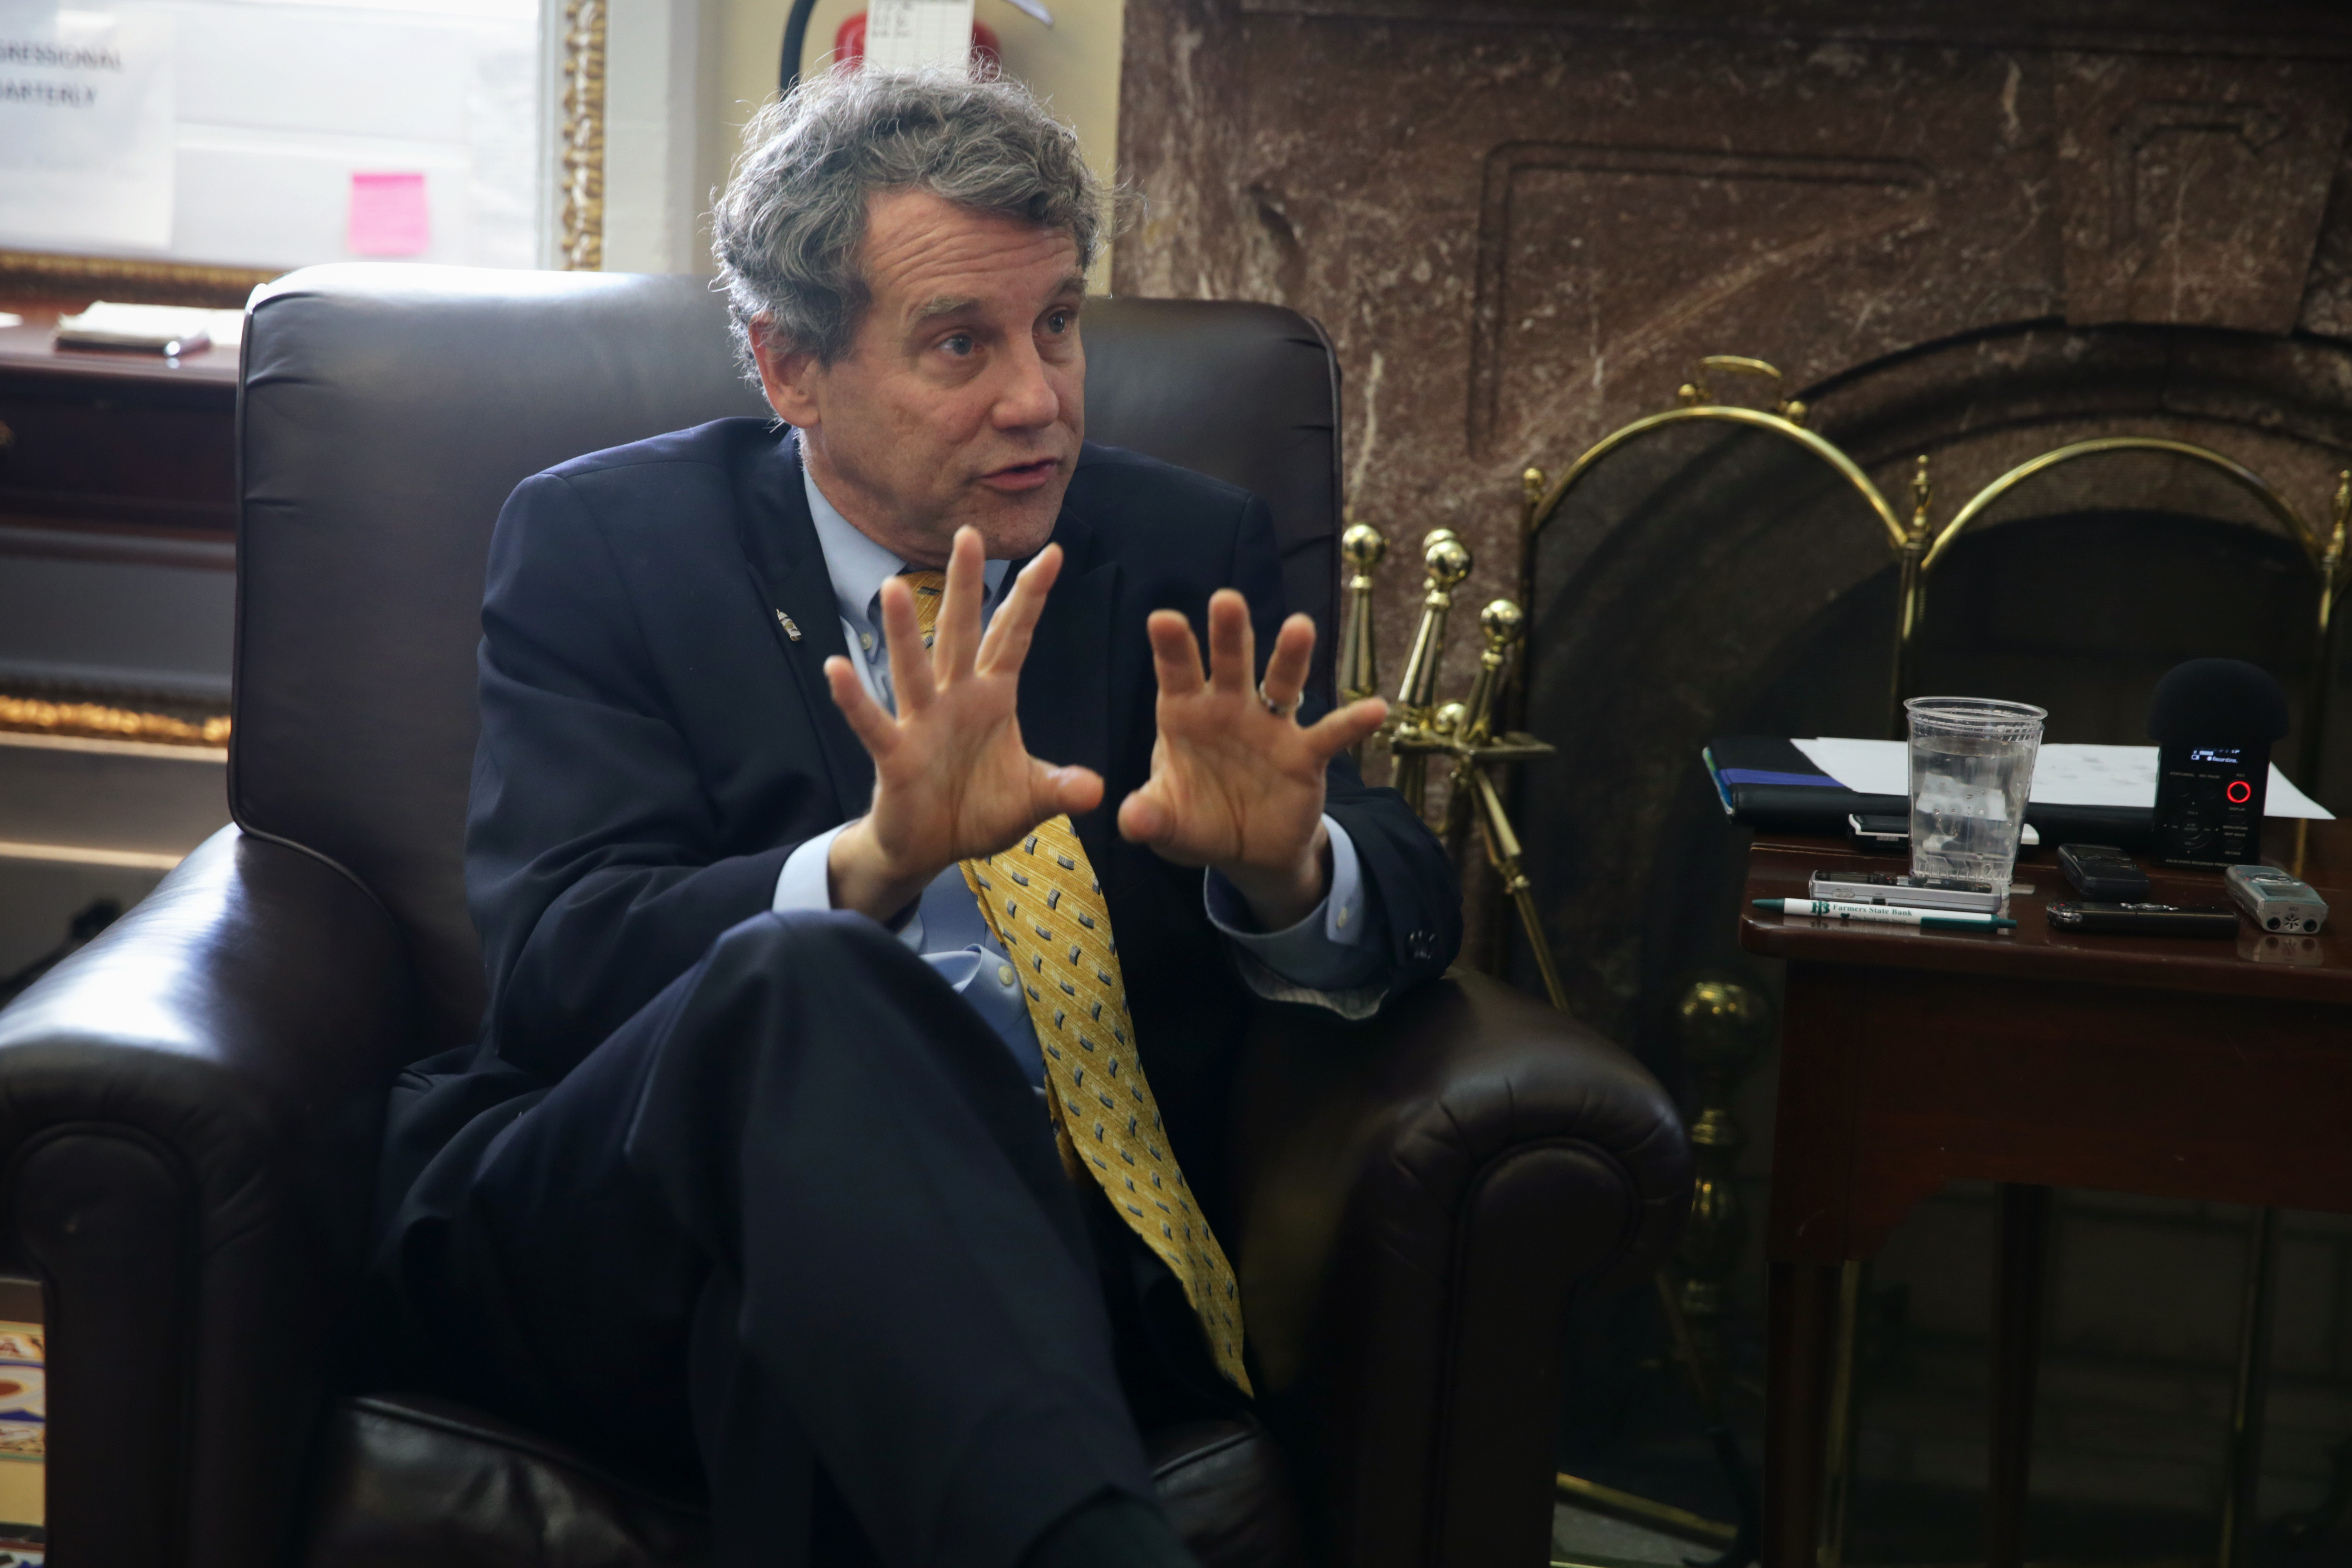 Sen. Sherrod Brown speaks to members of the media April 23, 2015 in Washington, DC. (Alex Wong/Getty Images)